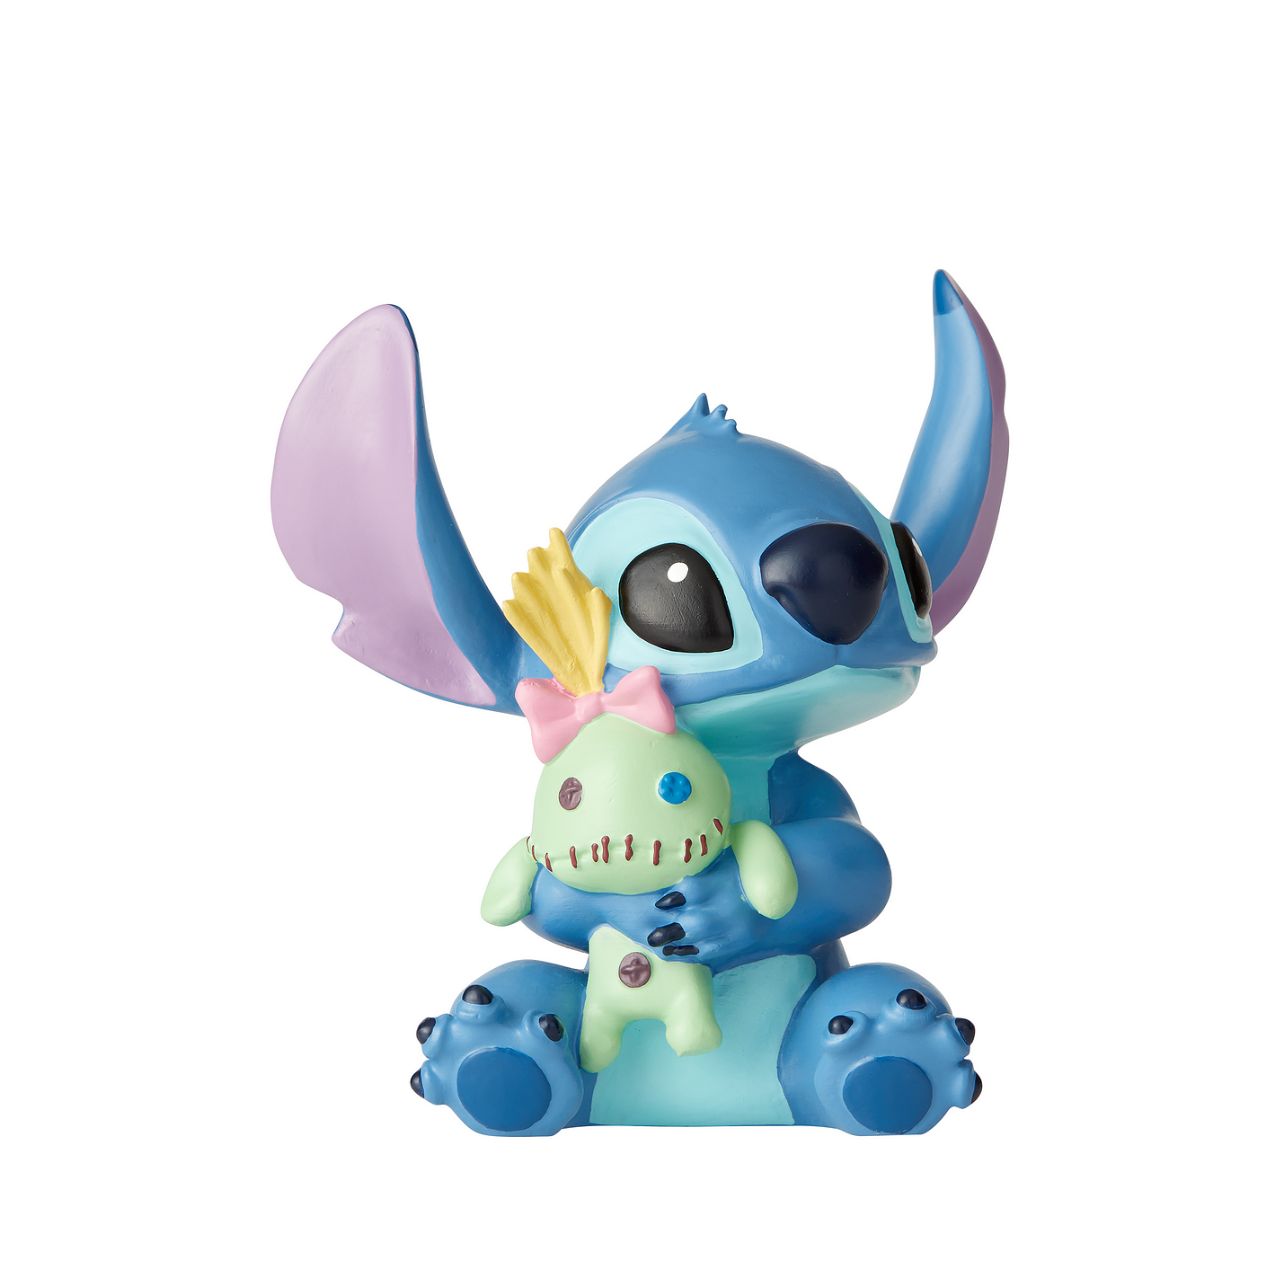 Disney Showcase Stitch Doll Figurine  Irresistibly adorable, this little Stitch will make you want to give your best friend the same tight squeeze he's giving his doll. 'Ohana means family, make him a part of yours.